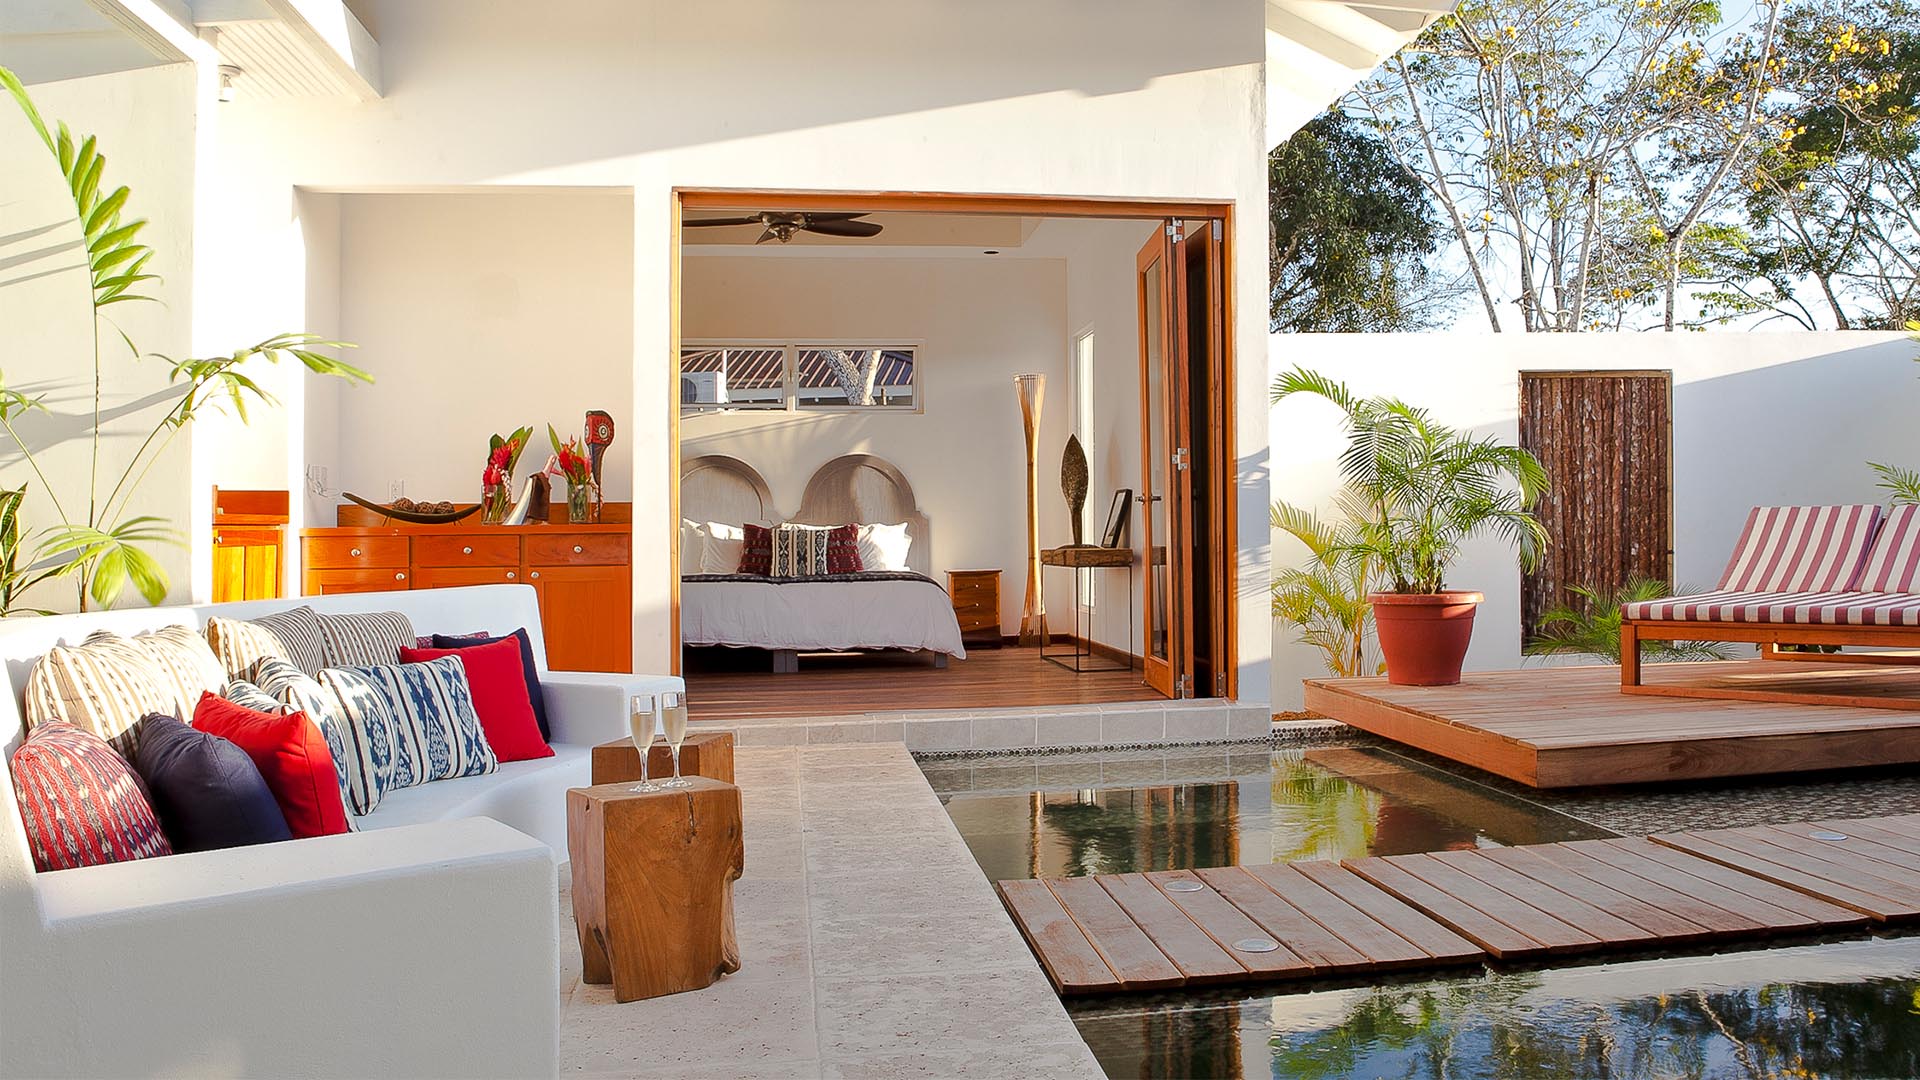 10 of the most romantic boutique hotel bedrooms in the world